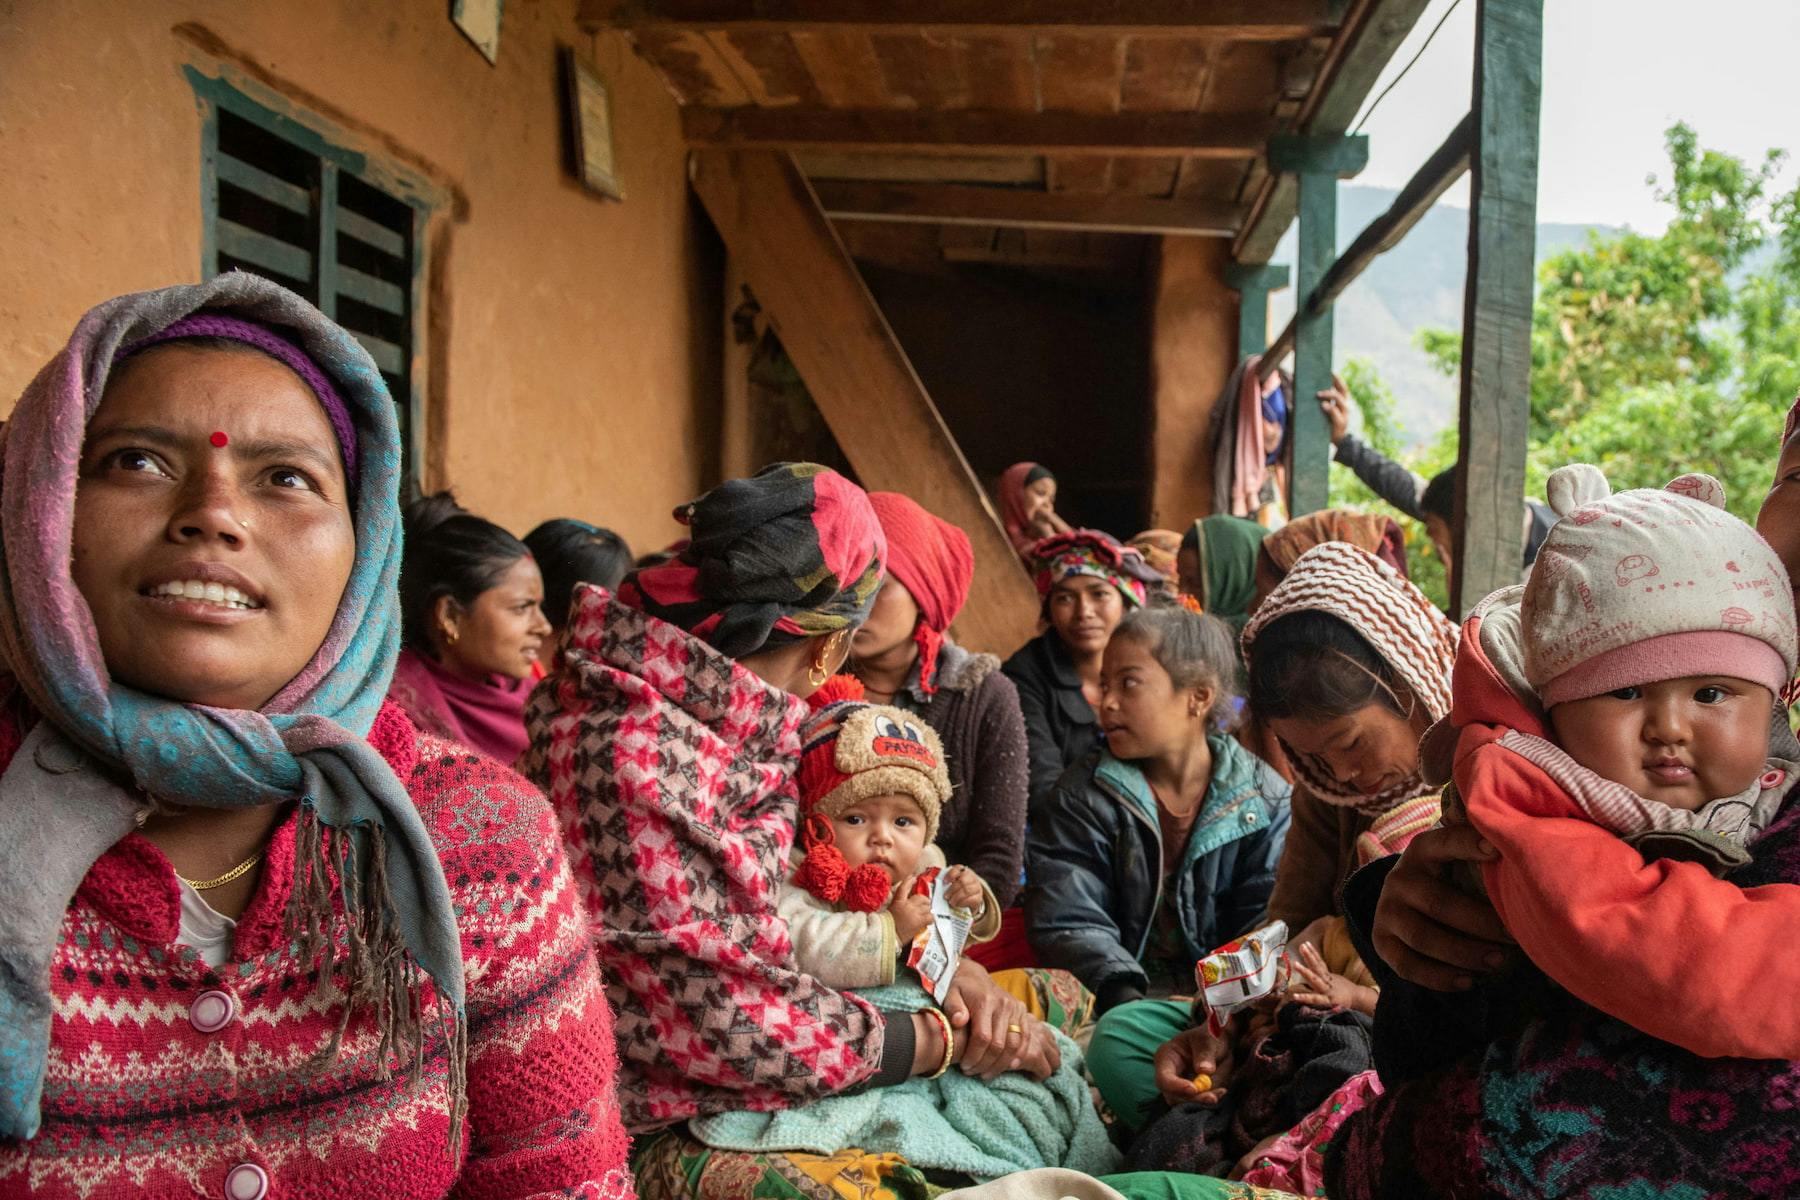 The picture shows mothers and their children in Nepal. They are sitting close together under a roof. They are dressed in winter and colorful.